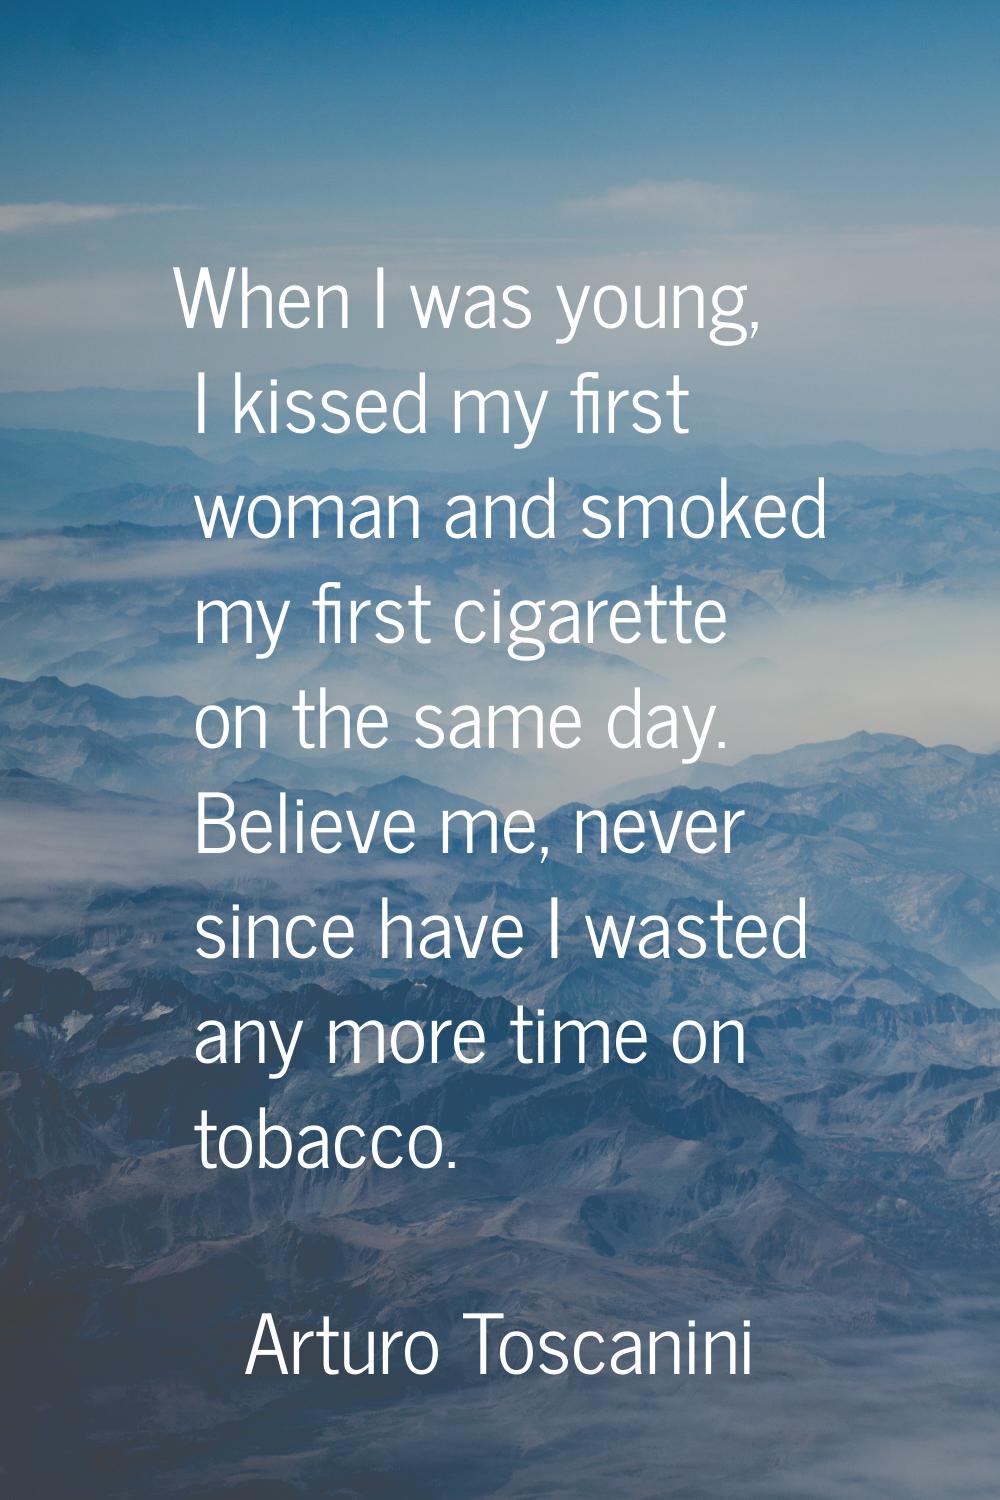 When I was young, I kissed my first woman and smoked my first cigarette on the same day. Believe me